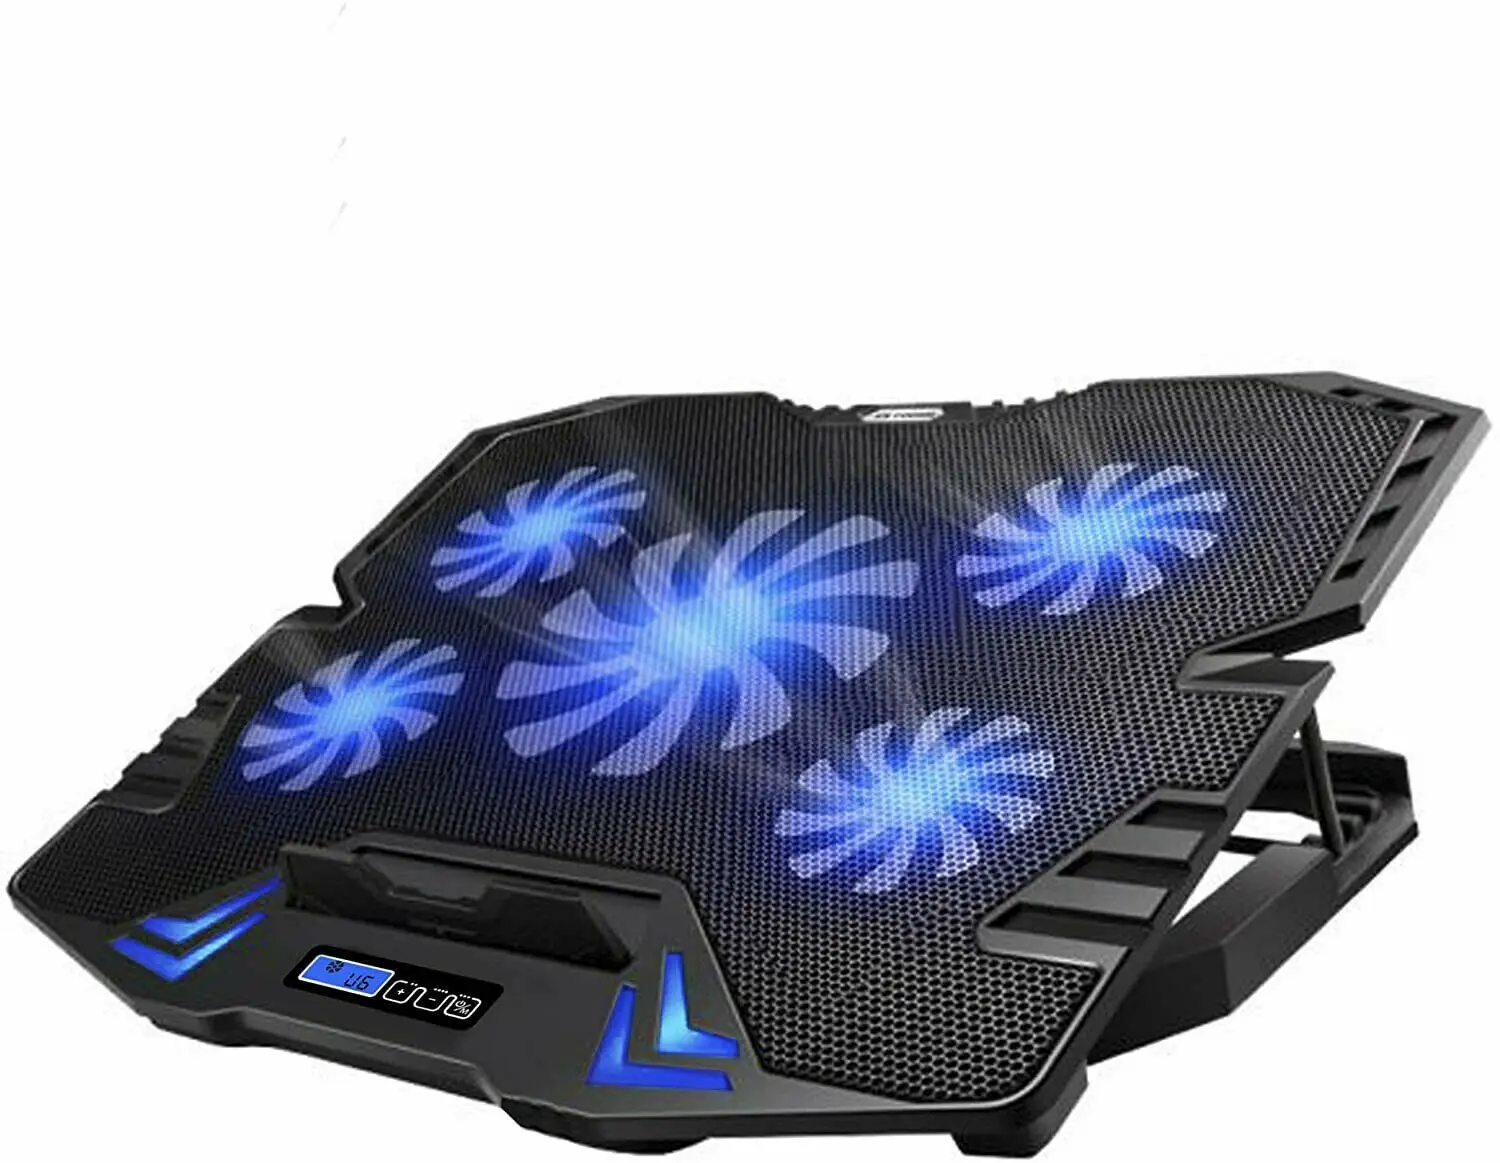 

FOR C5 10-15.6 inch Gaming Lap|top Cooler Cooling Pad, 5 Quiet Fans and LCD Screen